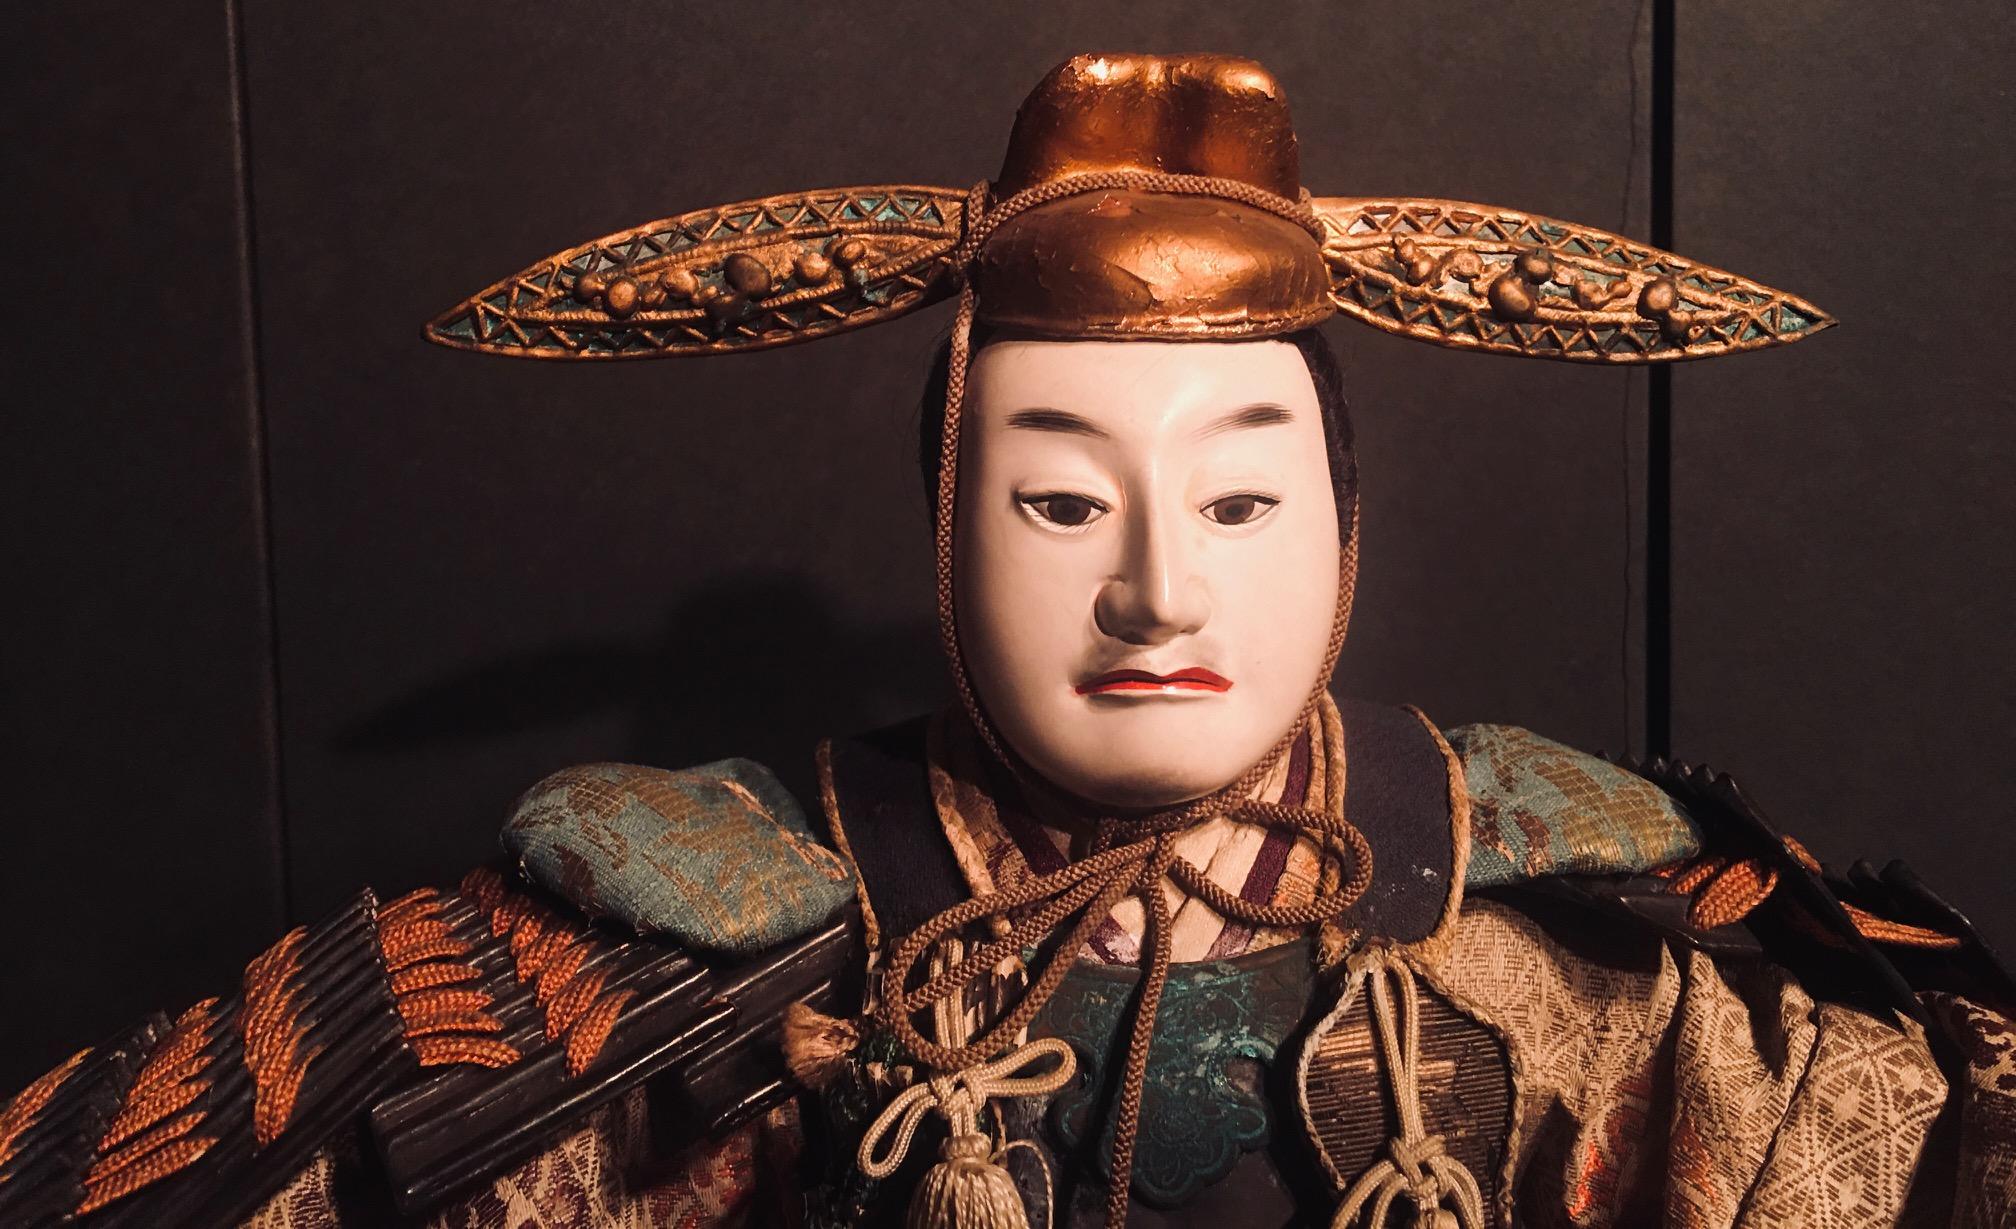 Japanese Edo Musha Ningyô (Boys Day Doll) depicting the legendary Toyotomi Hideyoshi, seated in court position and wearing elaborate brocade garments and gold lacquered armor. He is holding a gembun fan in his right hand and is wearing a Classic